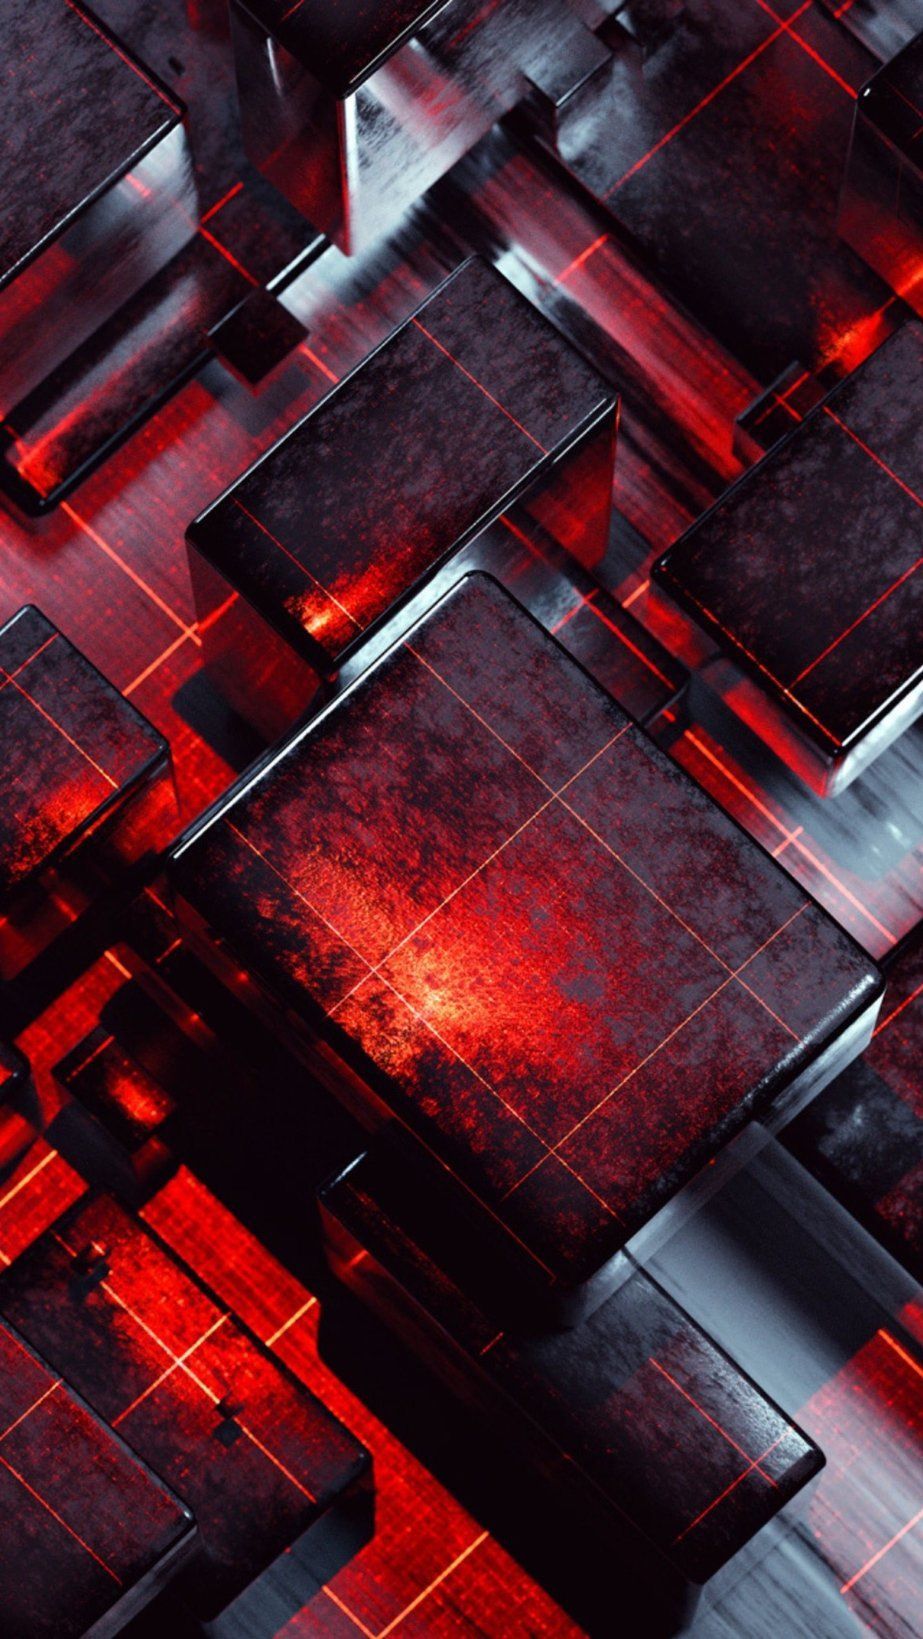 Black And Red Wallpaper. Red wallpaper, Red and black wallpaper, Phone wallpaper design